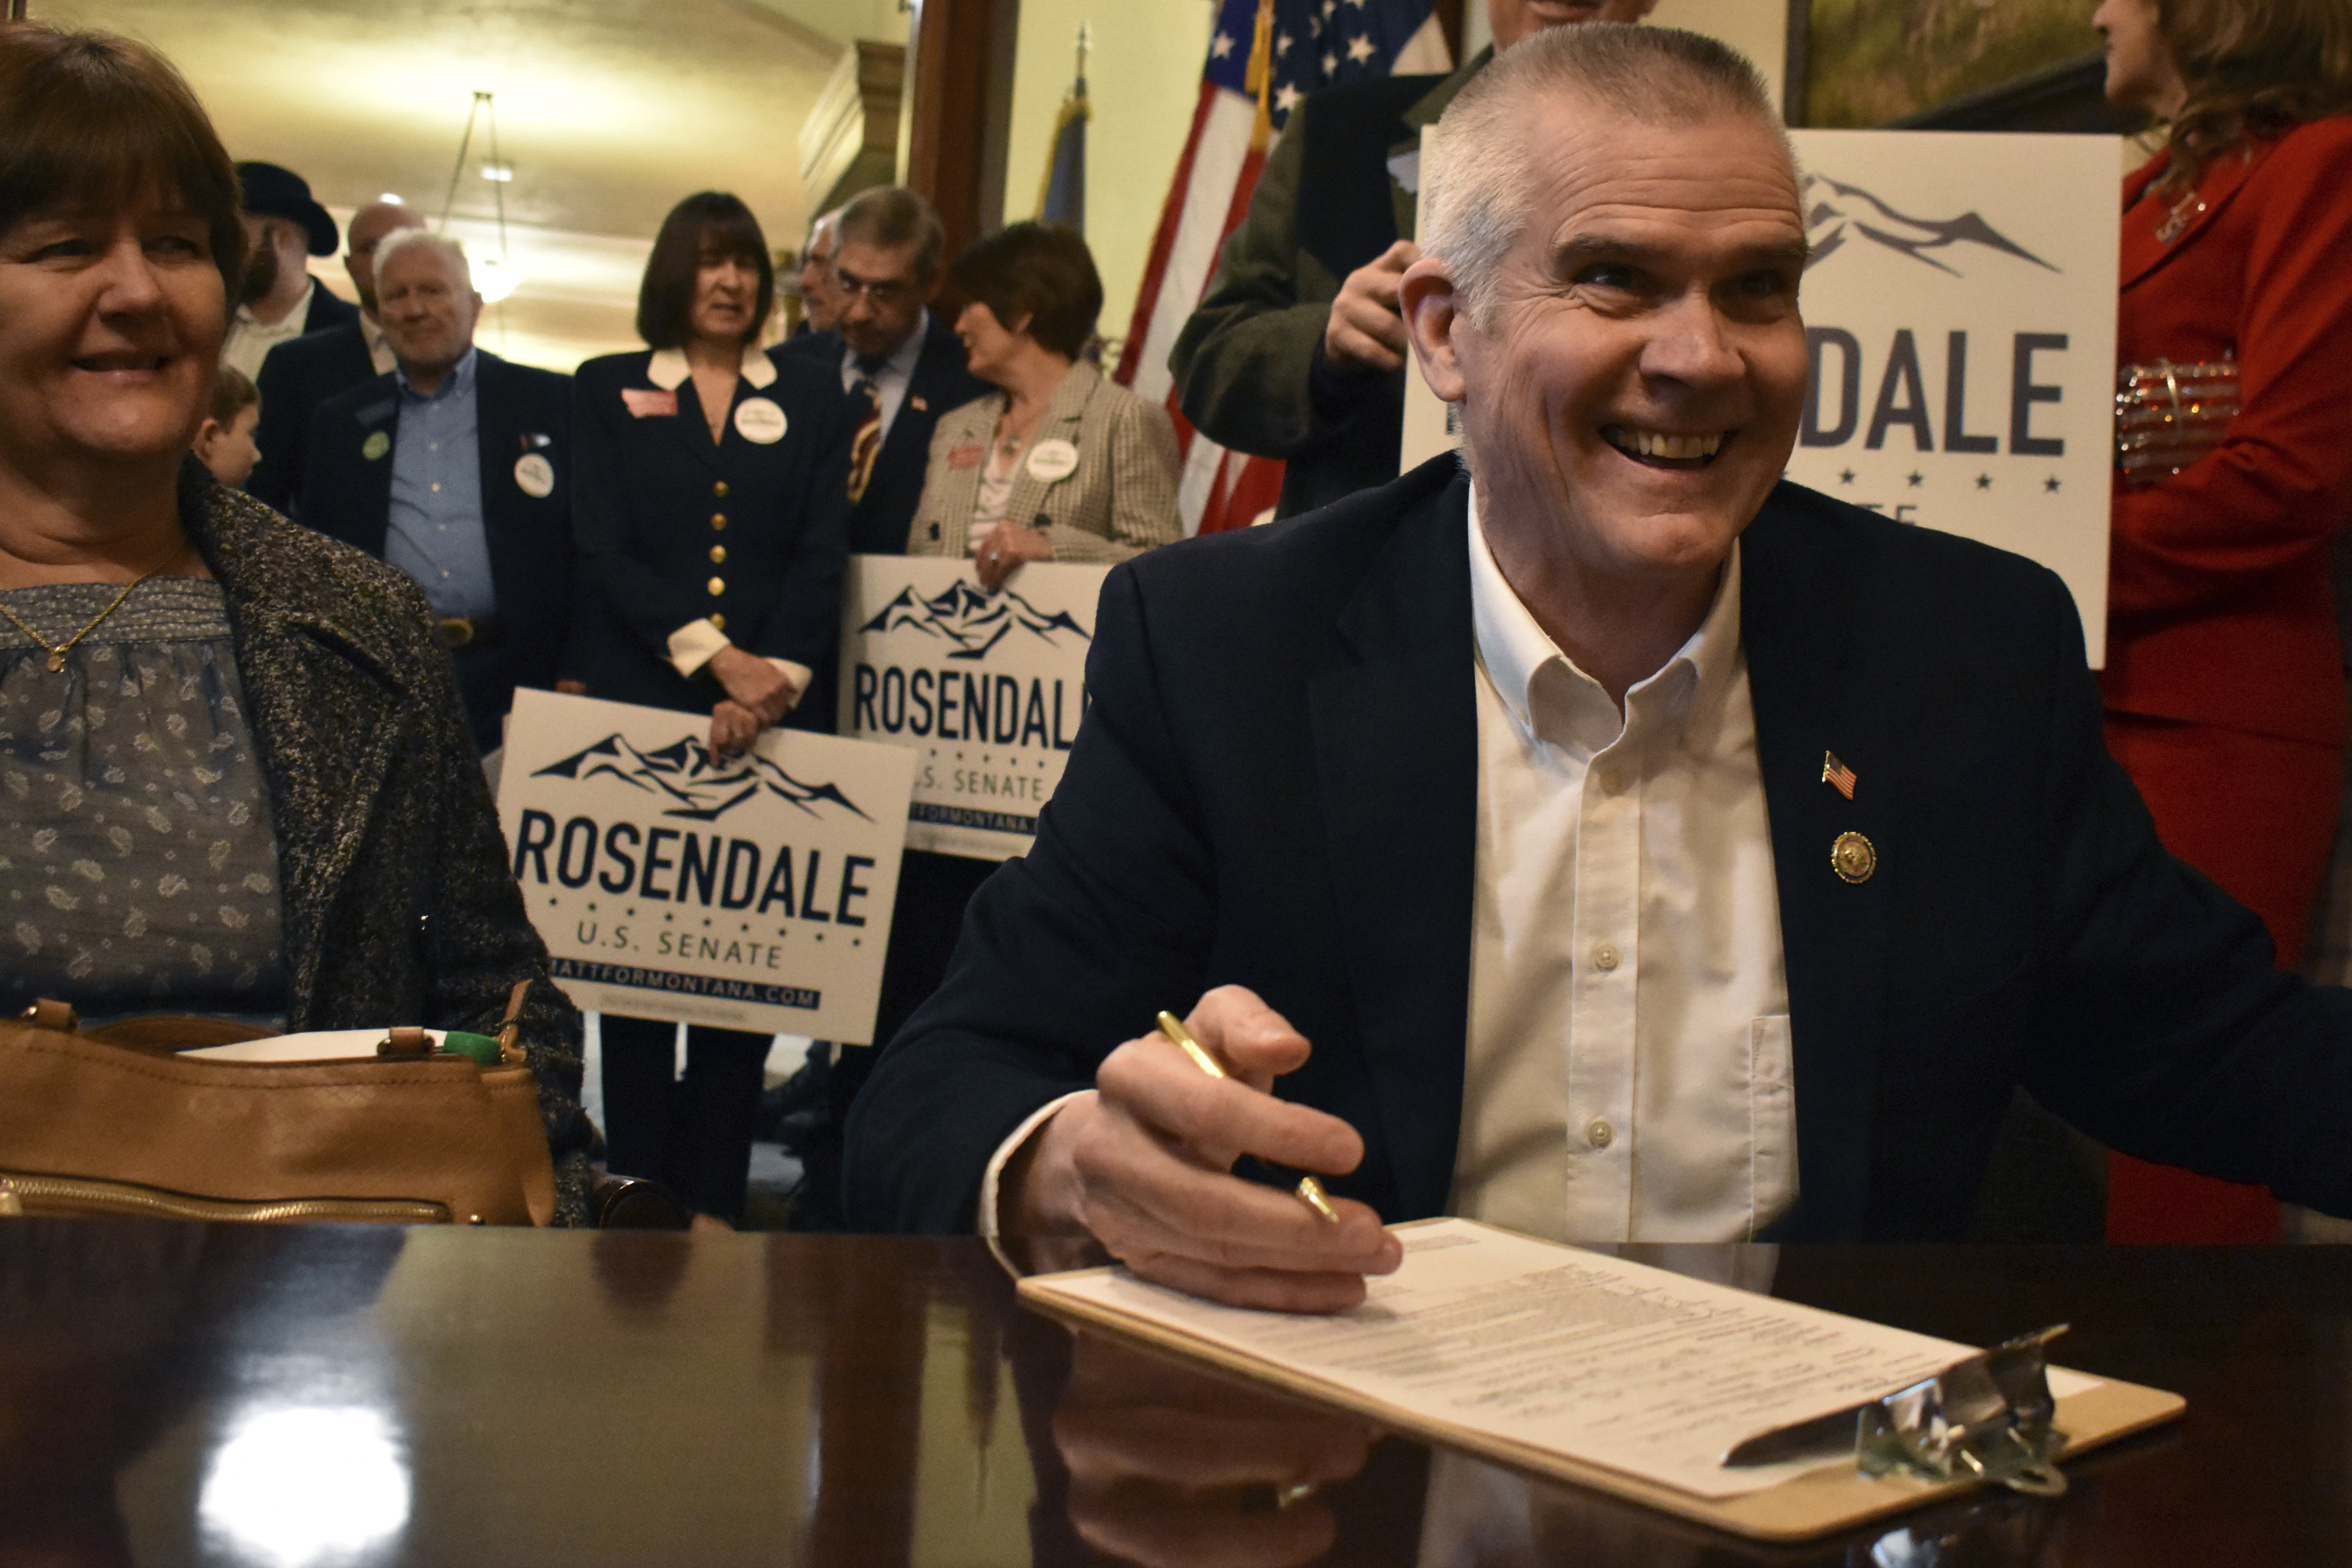 Republicans have a plan to take the Senate. A hard-right Montana lawmaker could crash the party